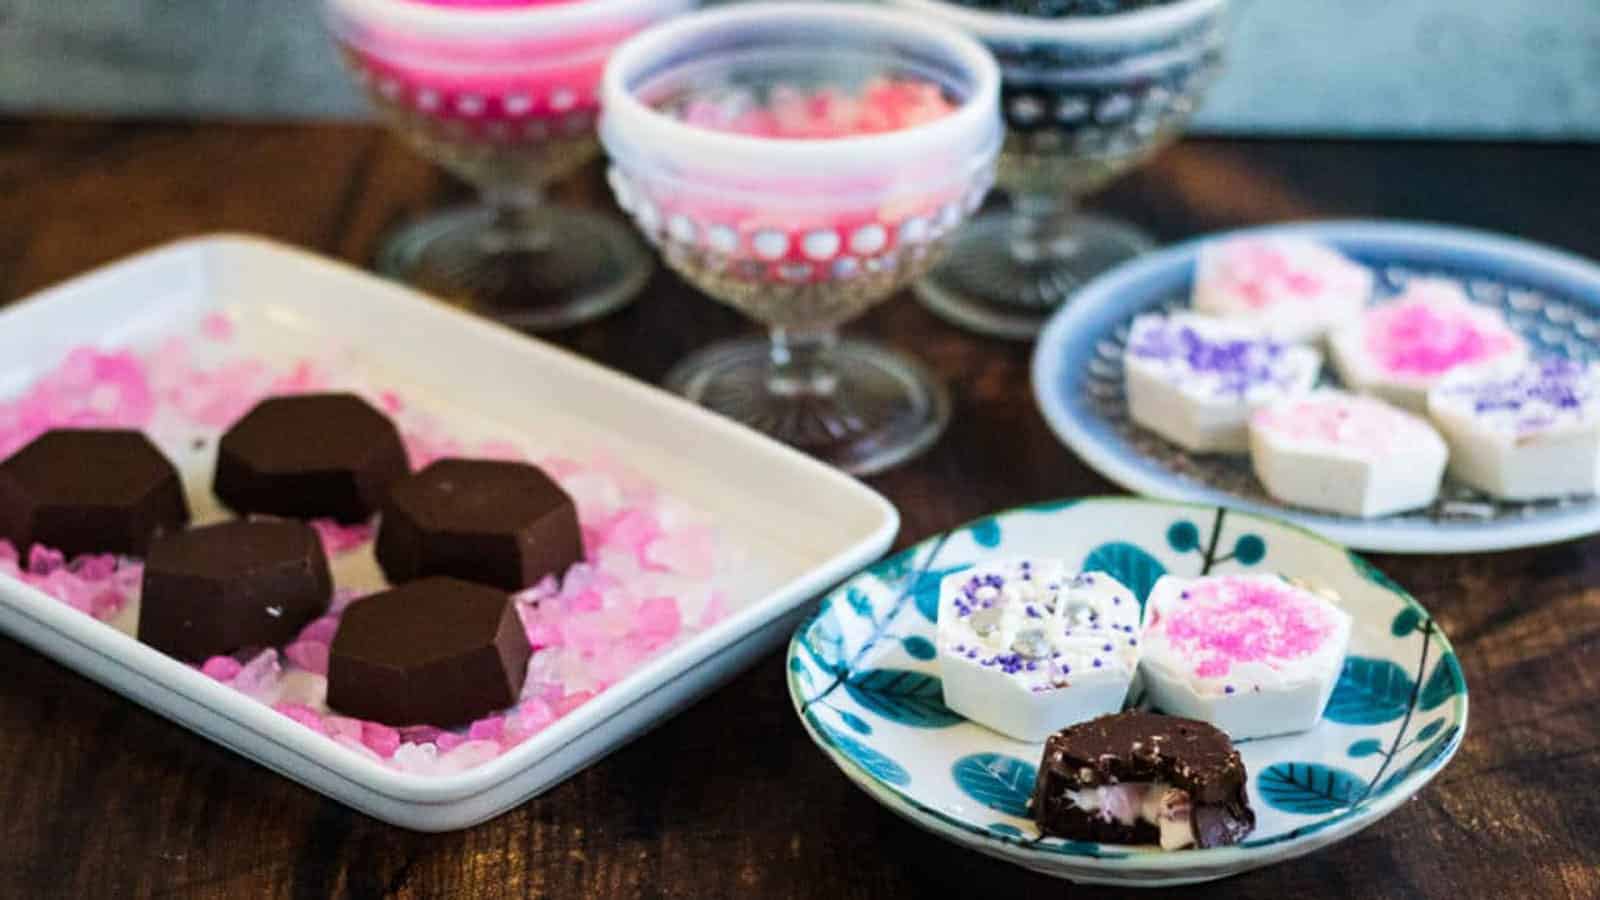 Chocolate covered strawberry cheesecake bites on little plates with pink sprinkles.